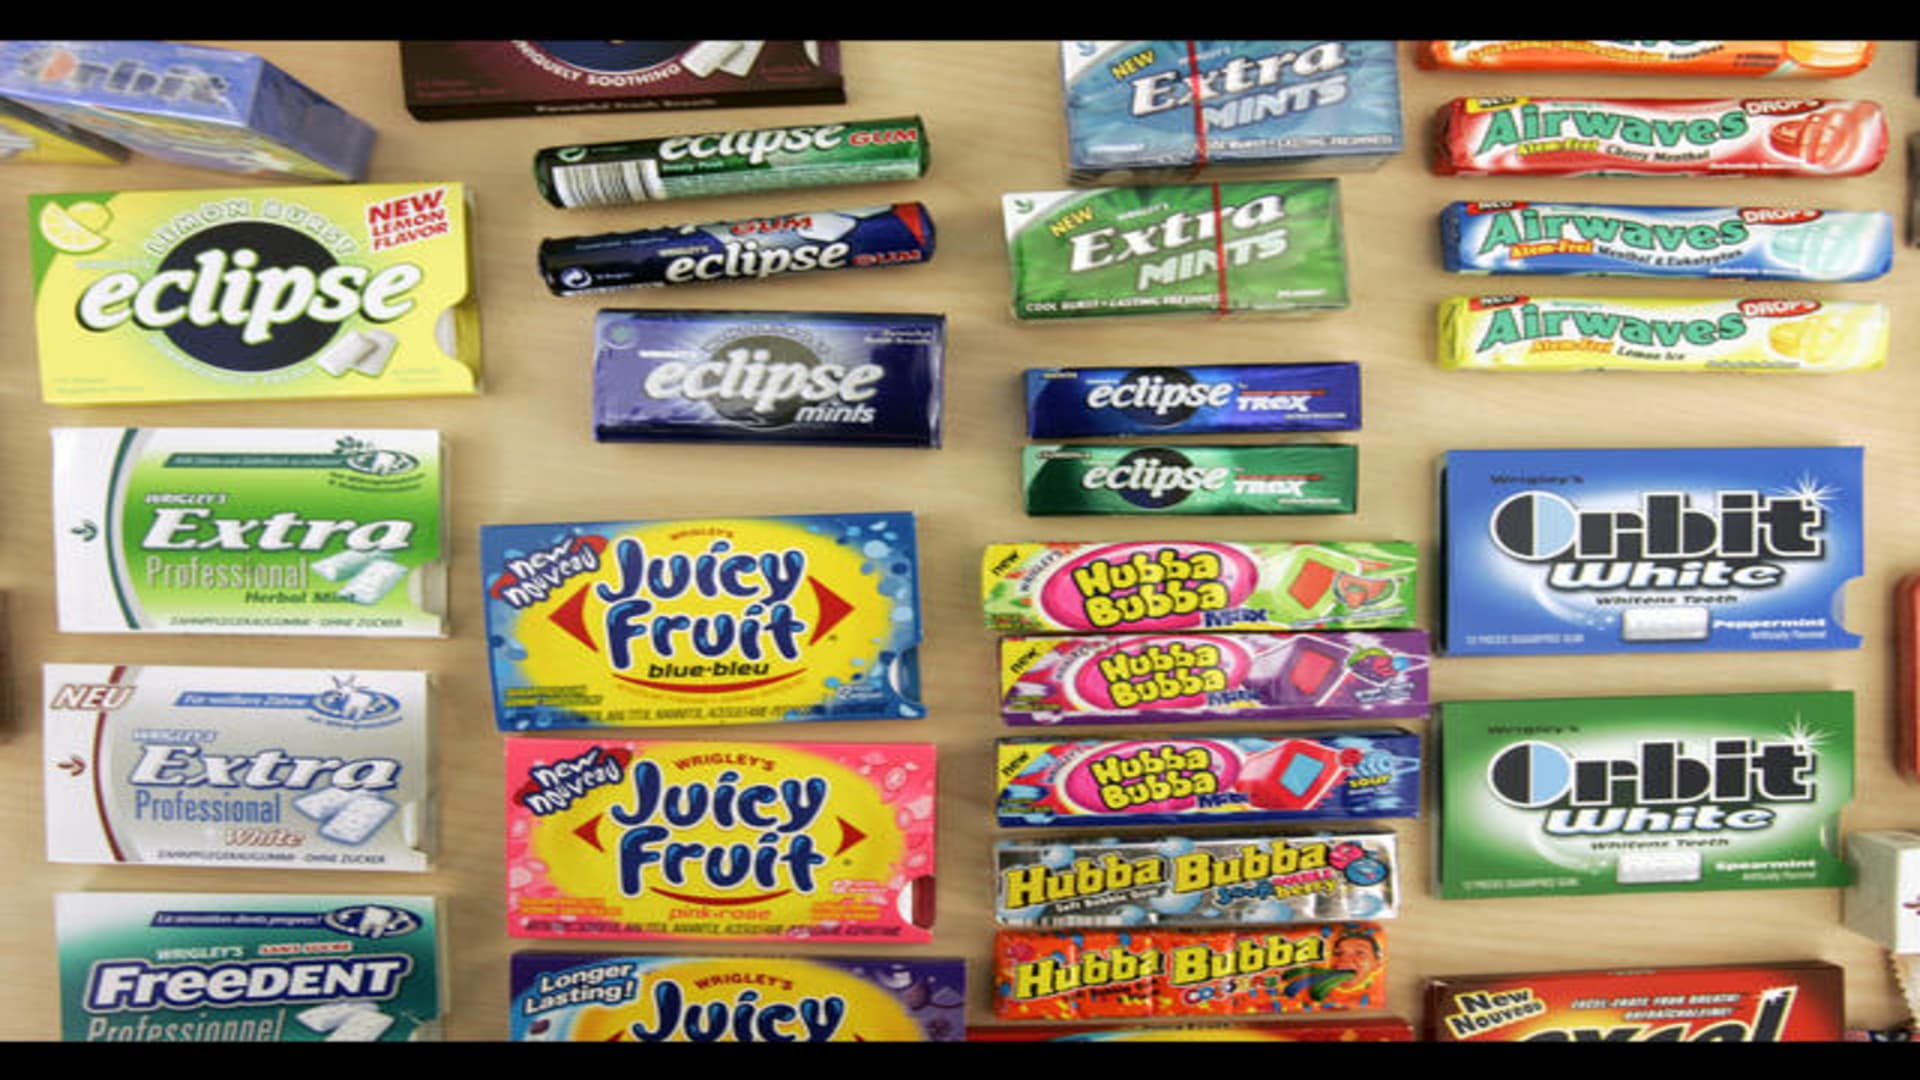 How Wrigley's managed to dominate the chewing gum world